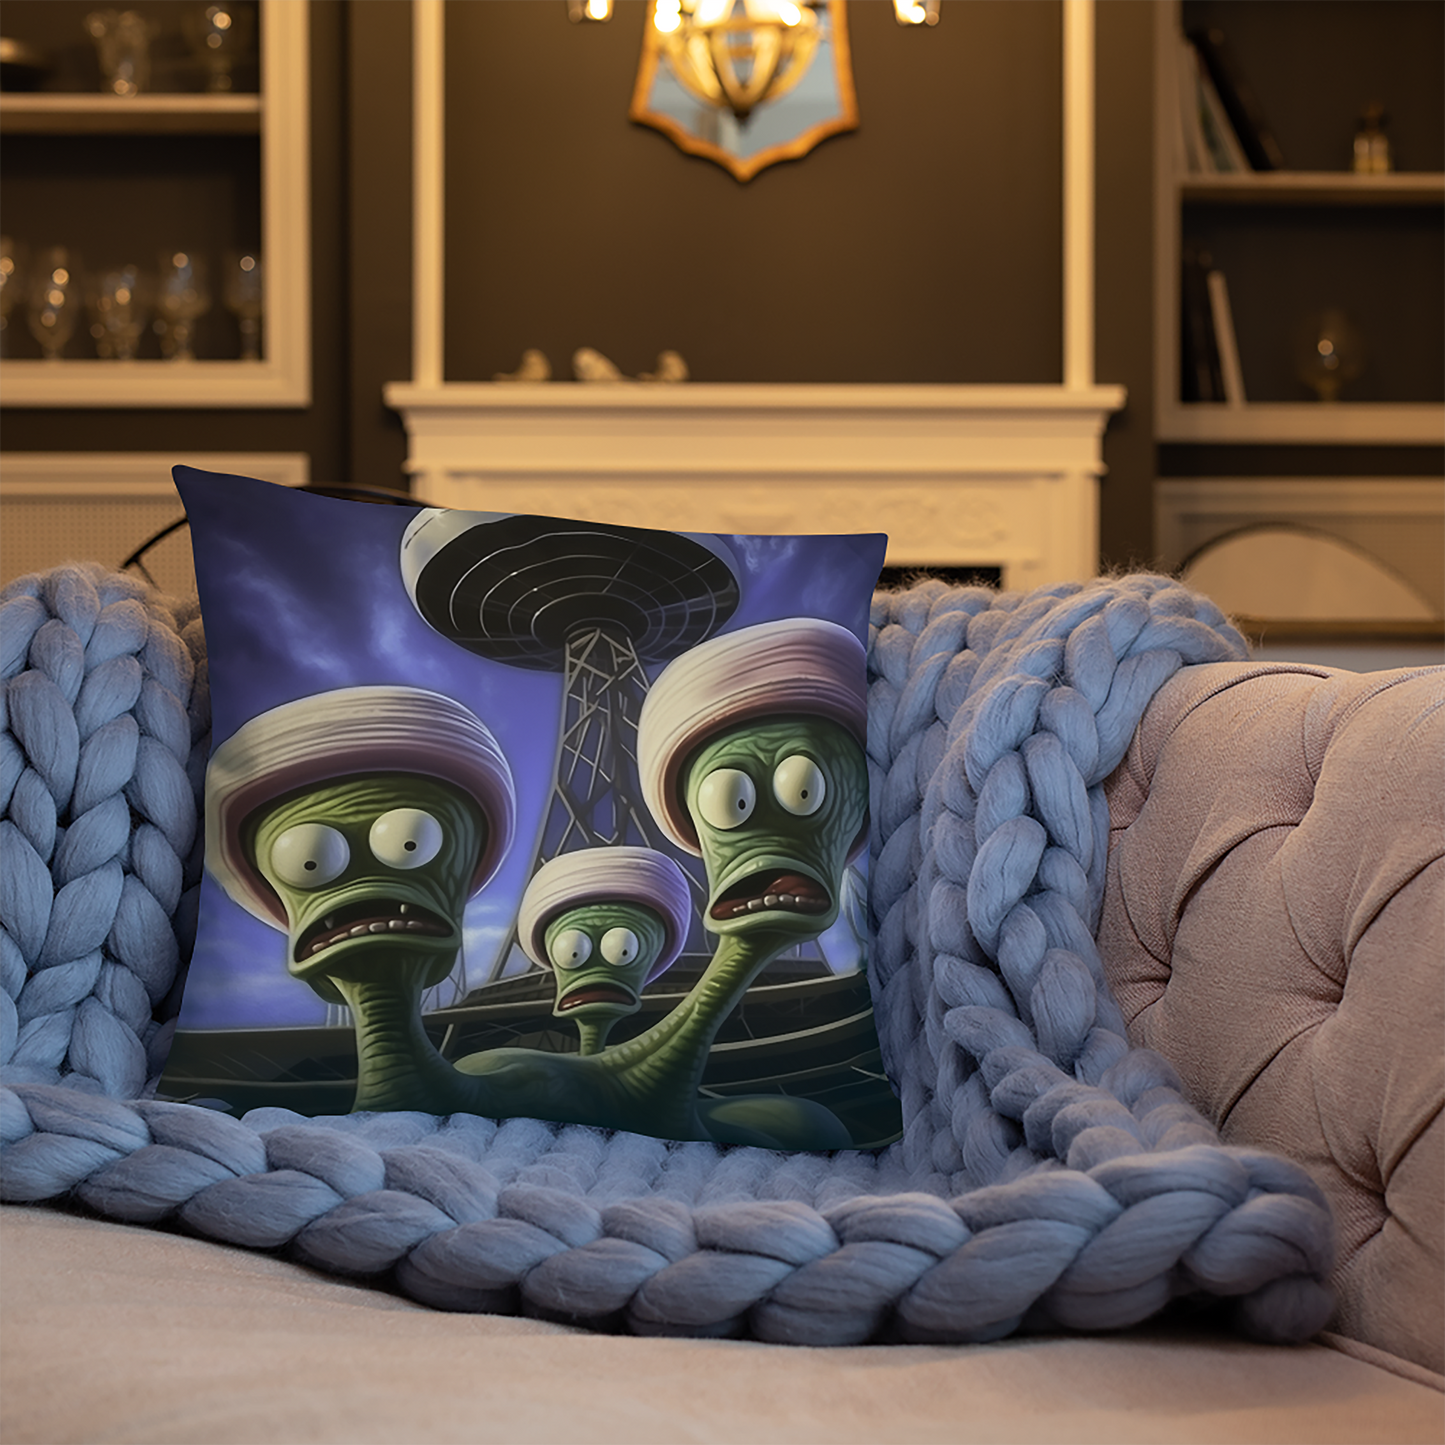 Space Throw Pillow Surrealistic Green Aliens Polyester Decorative Cushion 18x18